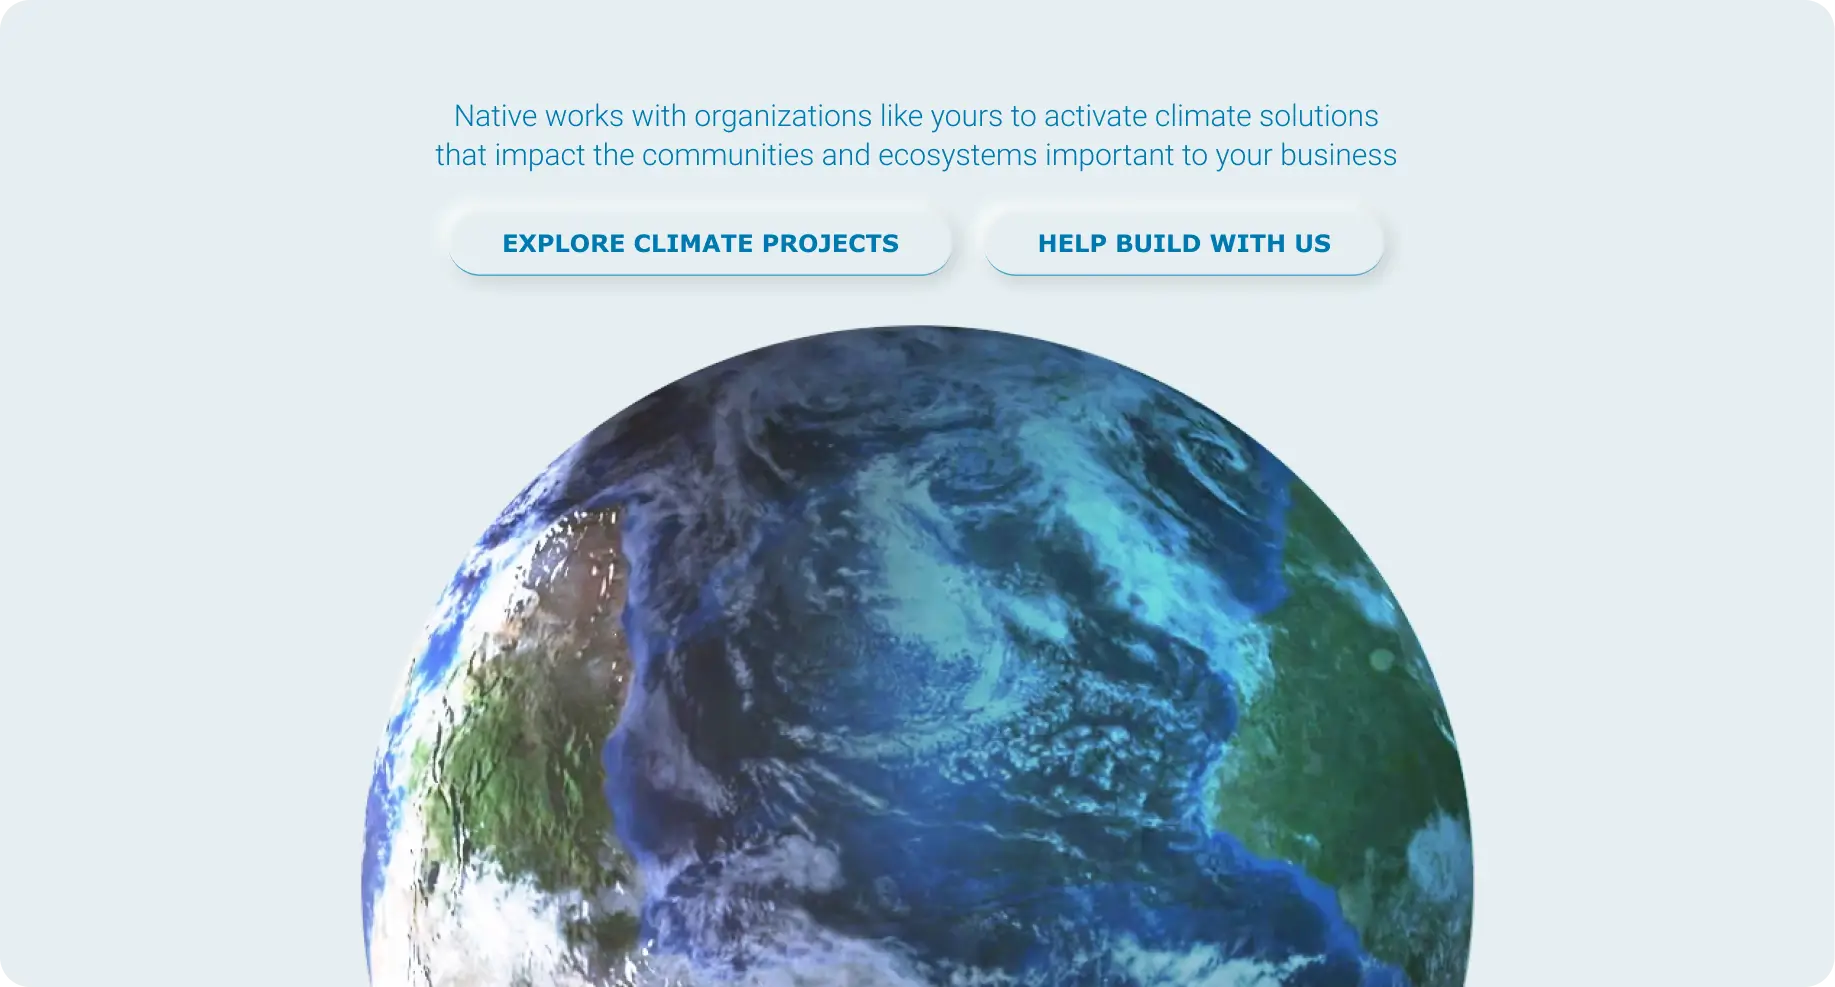 Native works with organizations like yours to activate climate solutions that impact the communities and ecosystems important to your business